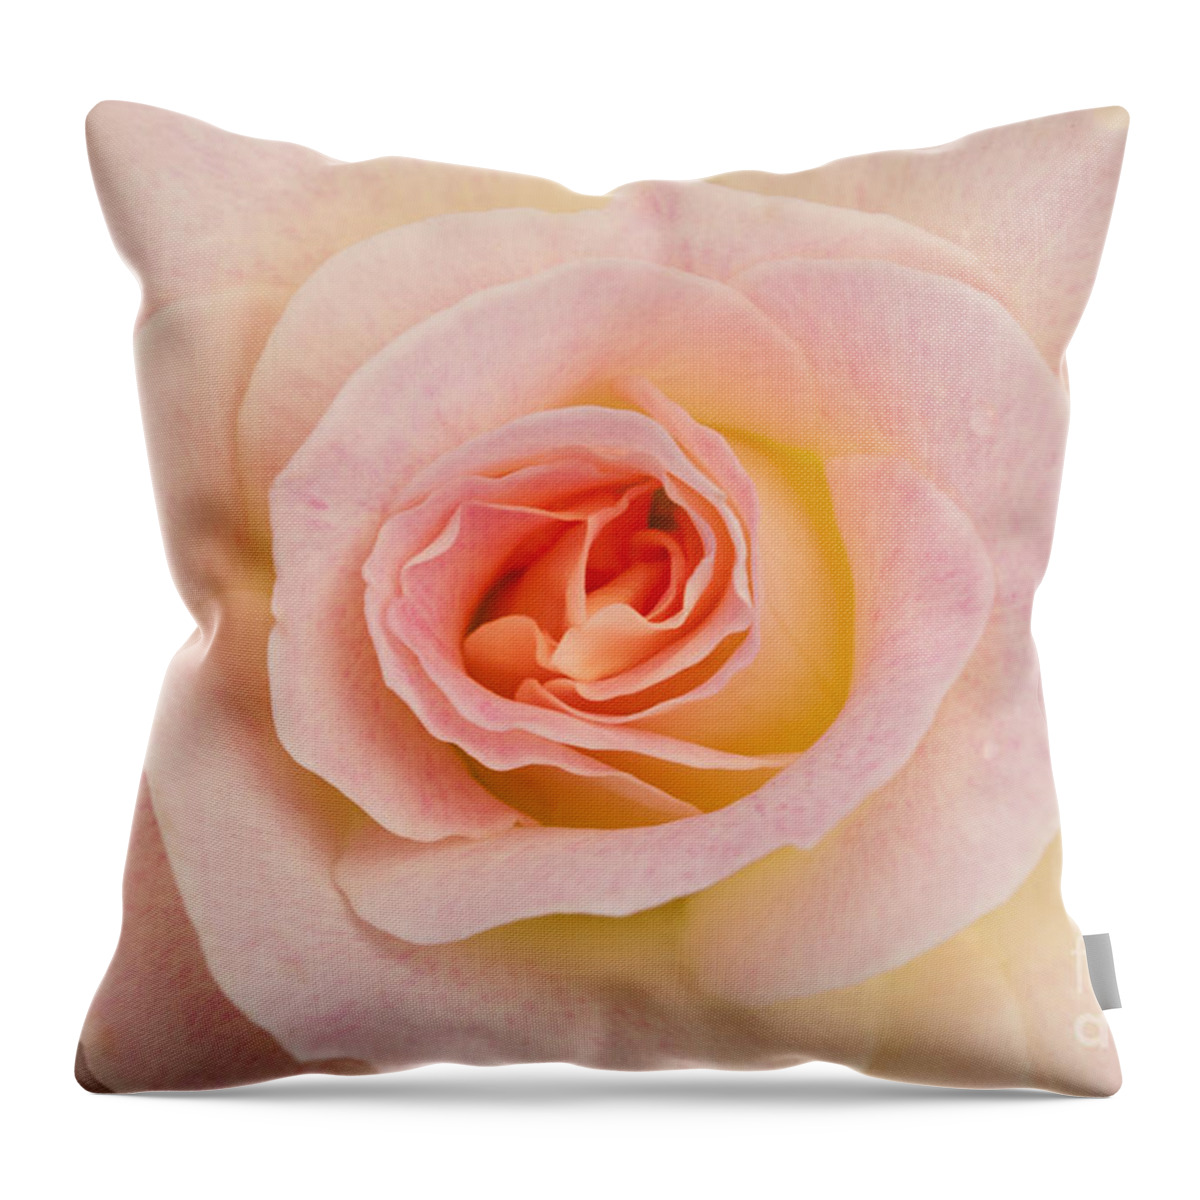 Rose Throw Pillow featuring the photograph Sweetness by Patty Colabuono